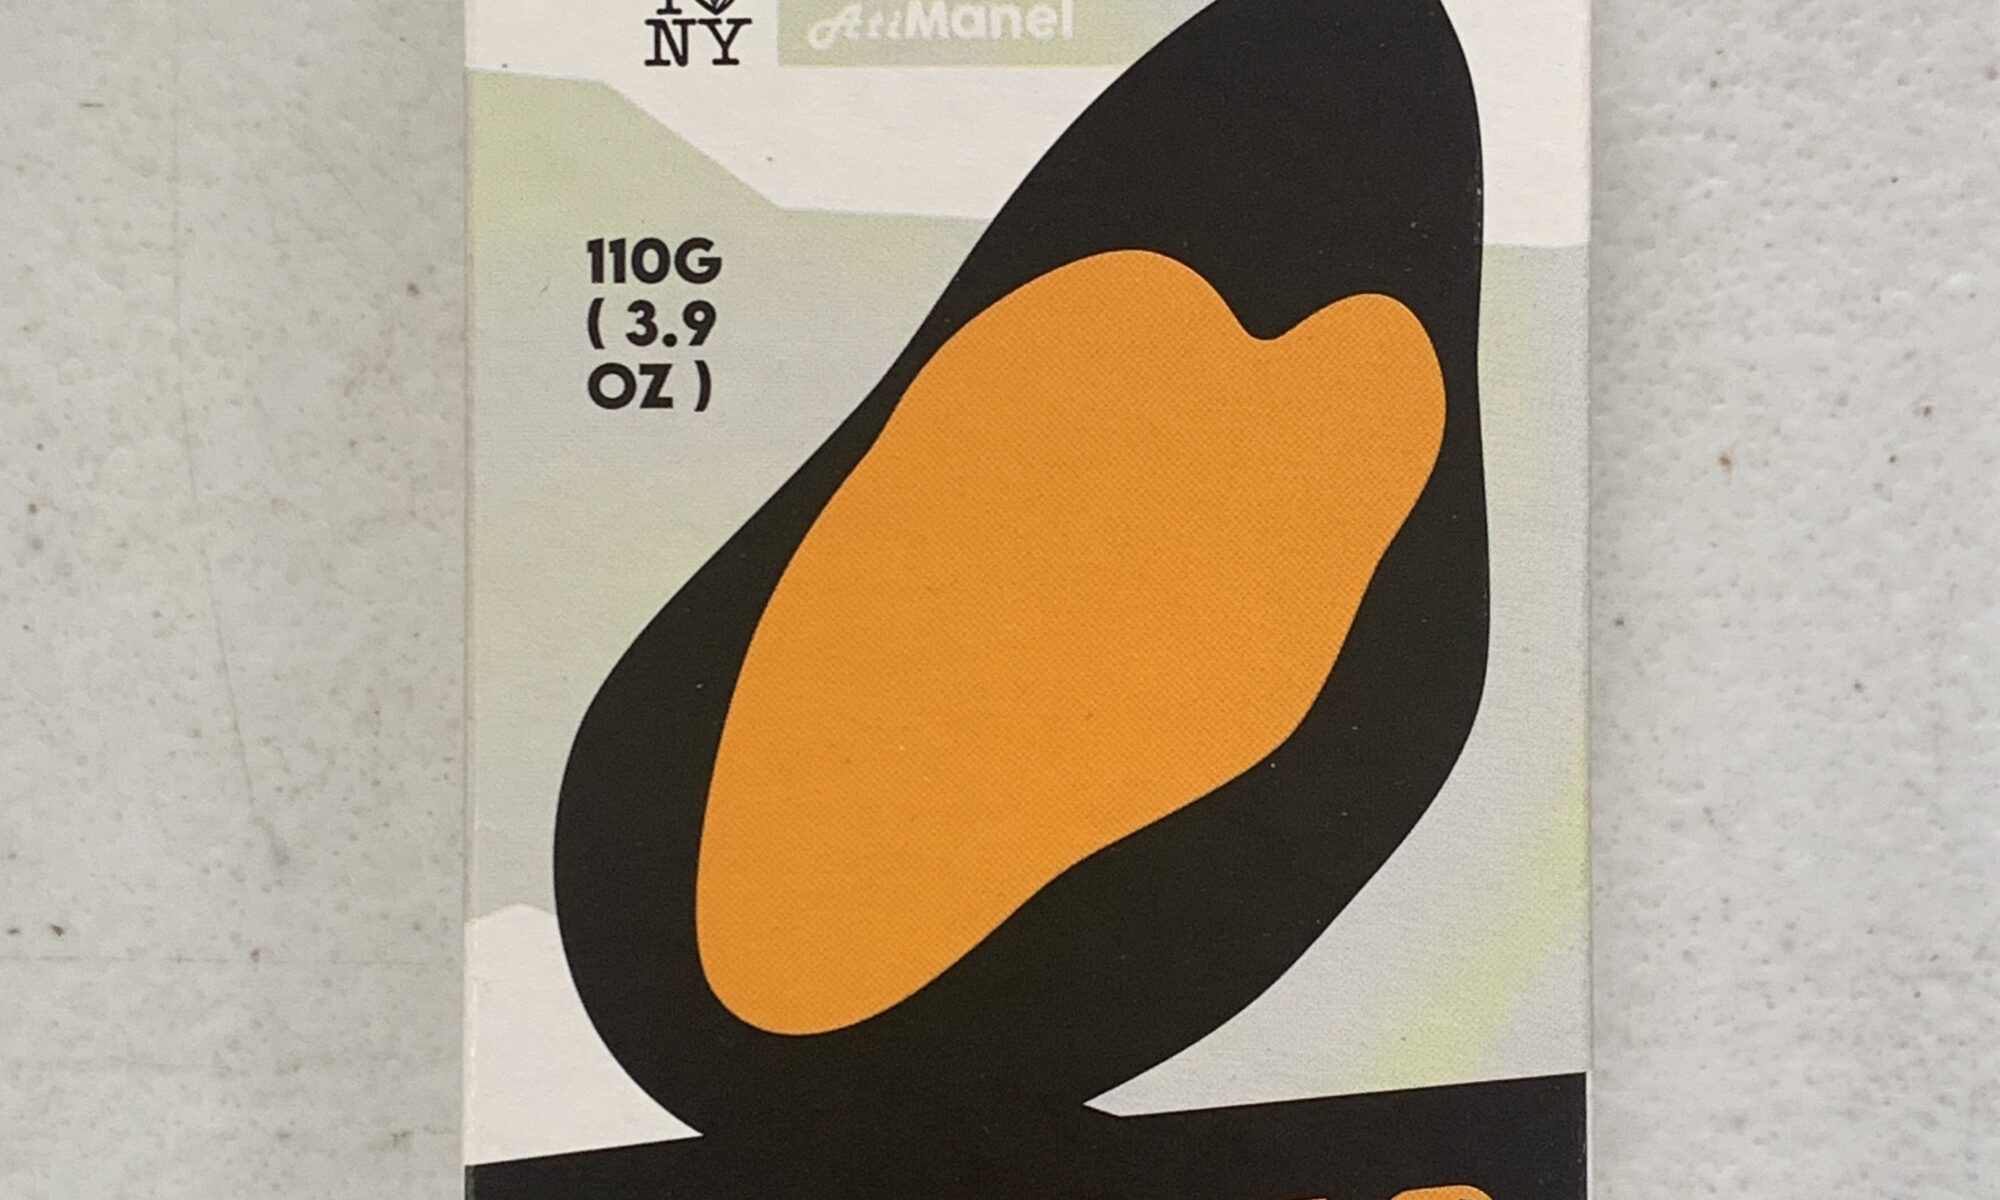 Image of the front of a package of Ati Manel Mussels in Escabeche